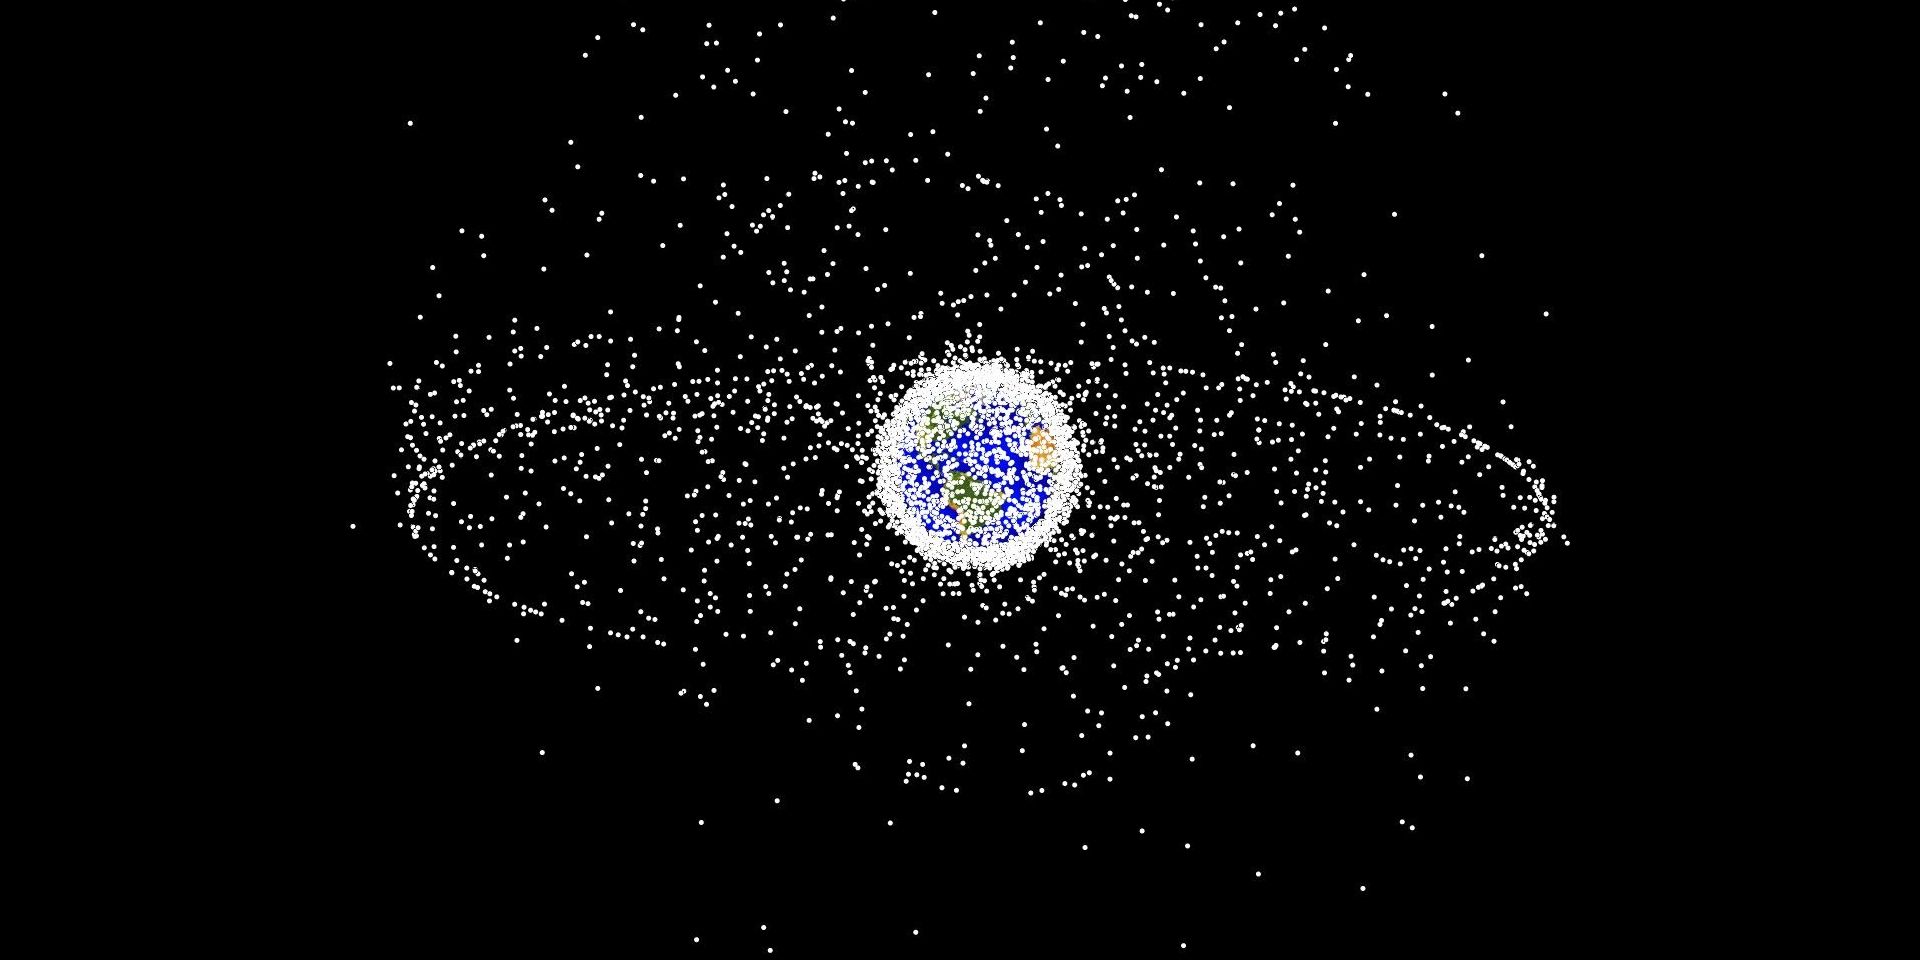 Computer-generated representation of the locations of space debris as could be seen from high Earth orbit.